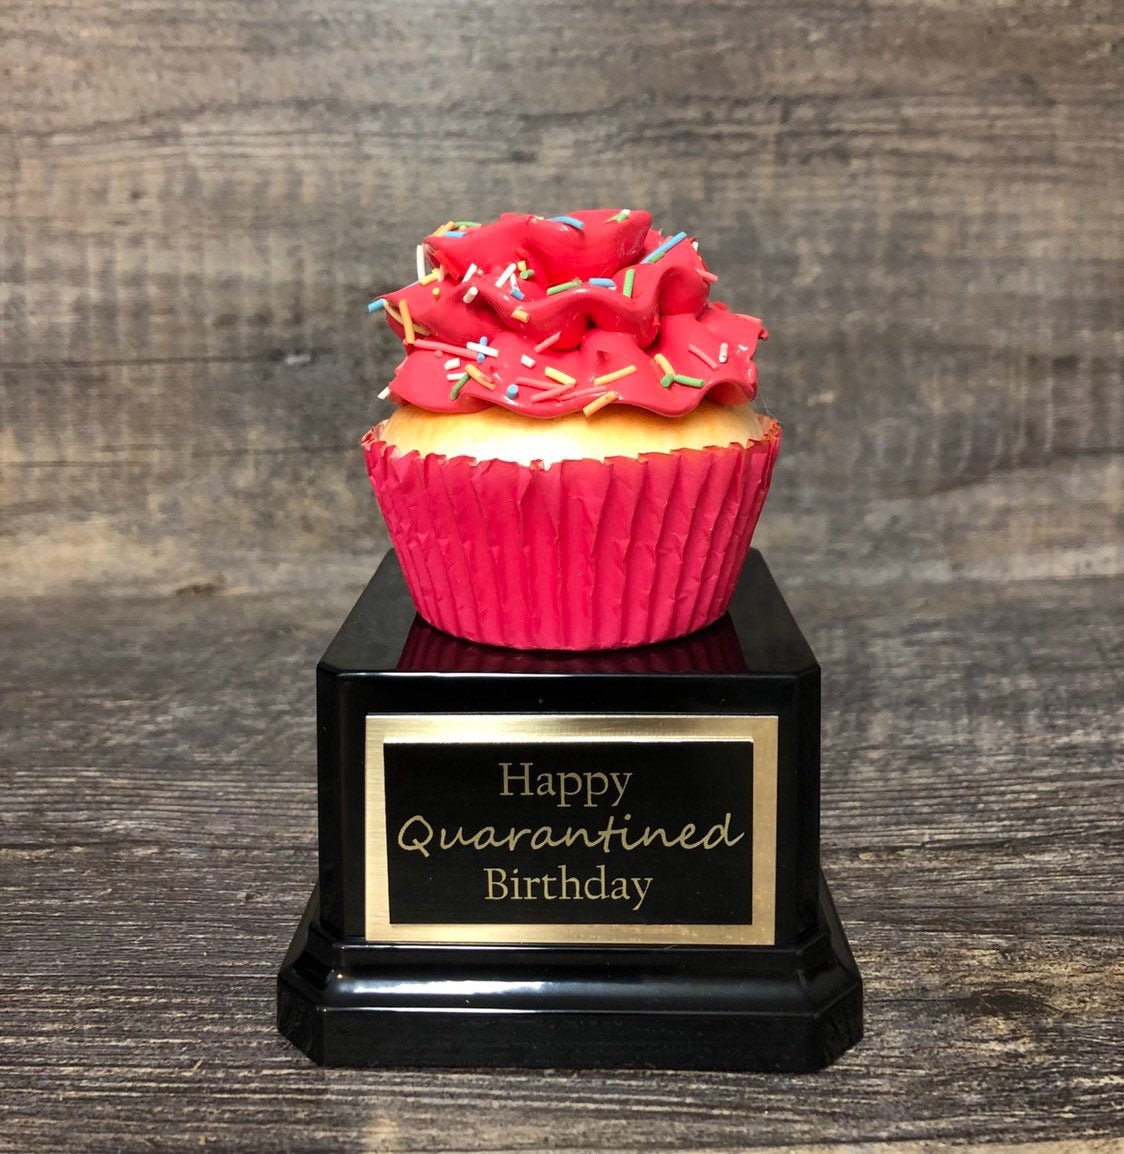 Cupcake Trophy Birthday Quarantine Gag Gift Social Distancing Happy Birthday Dessert Trophy Personalized Funny Trophy Adult Humor